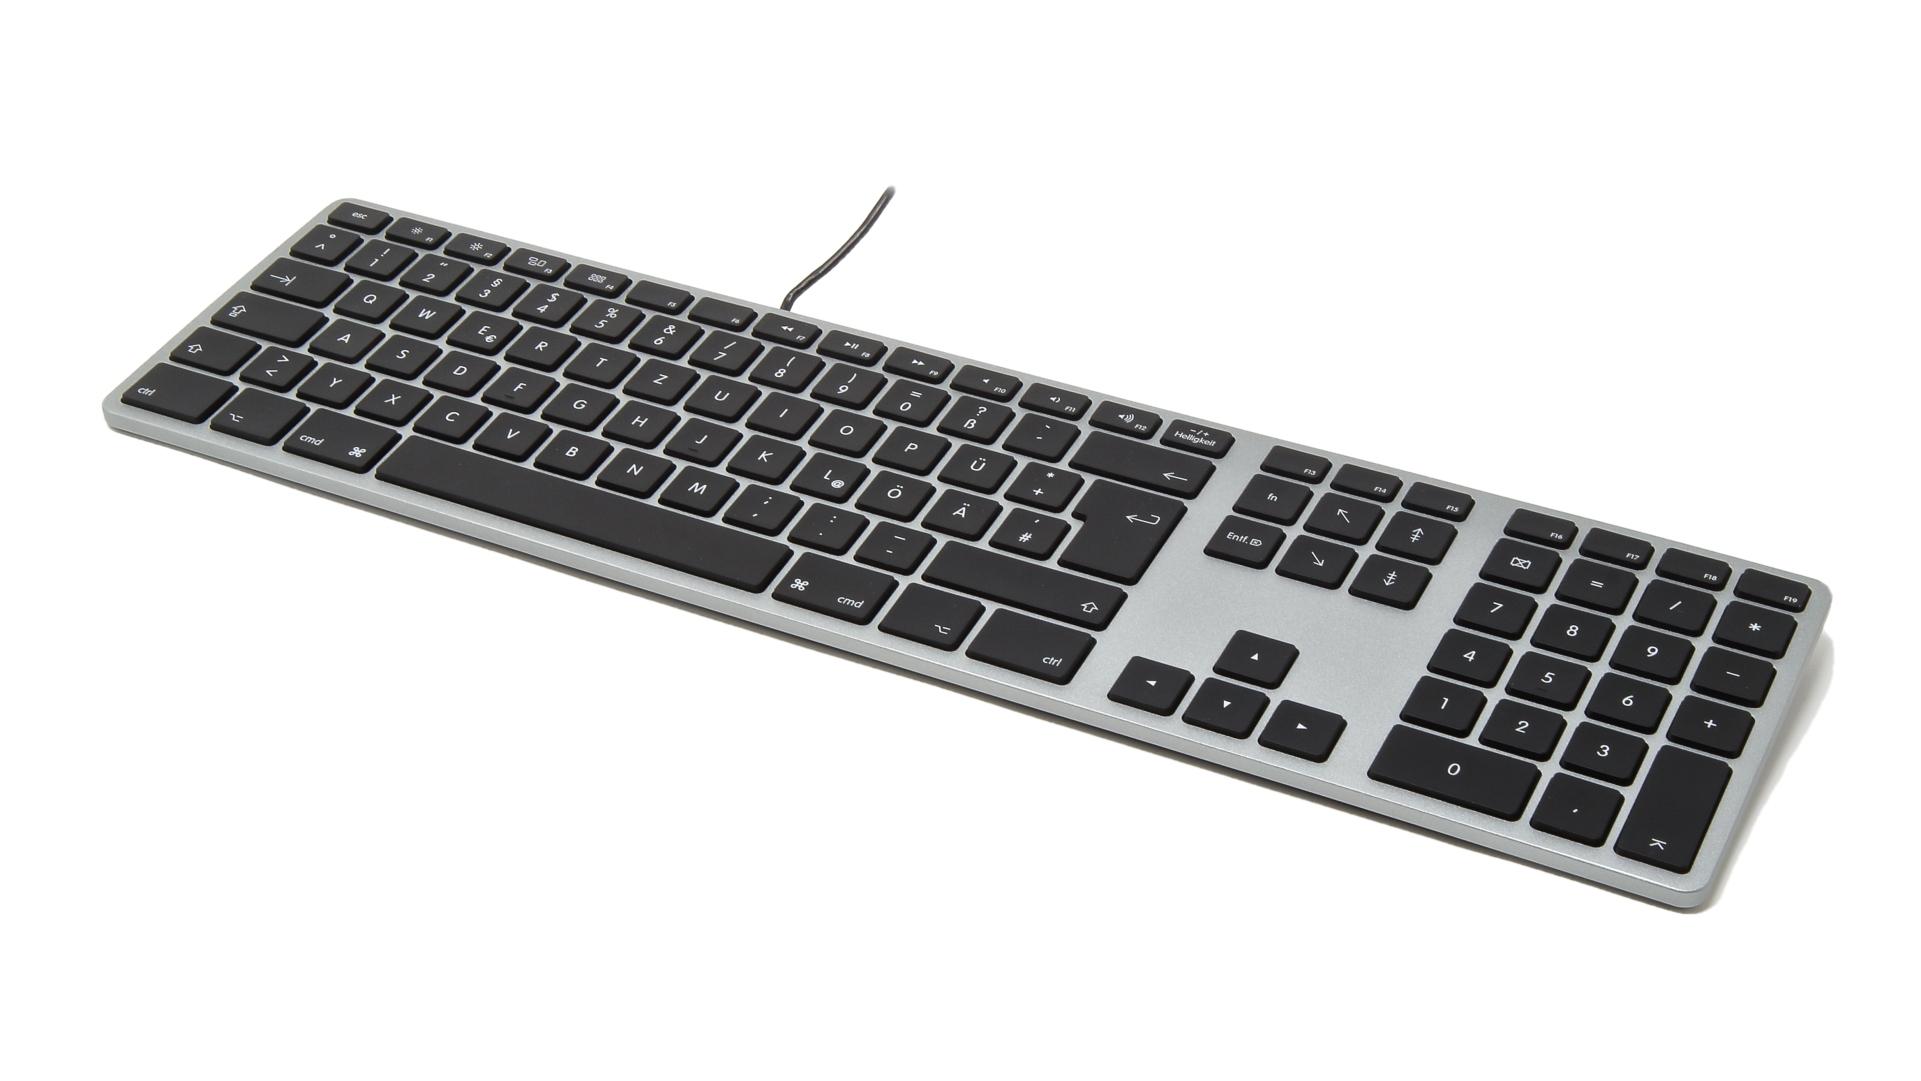 Matias Aluminum Extended USB Keyboard with RGB Backlight Swiss-Layout (Switzerland) for Mac OS - Space-Grey with black keys